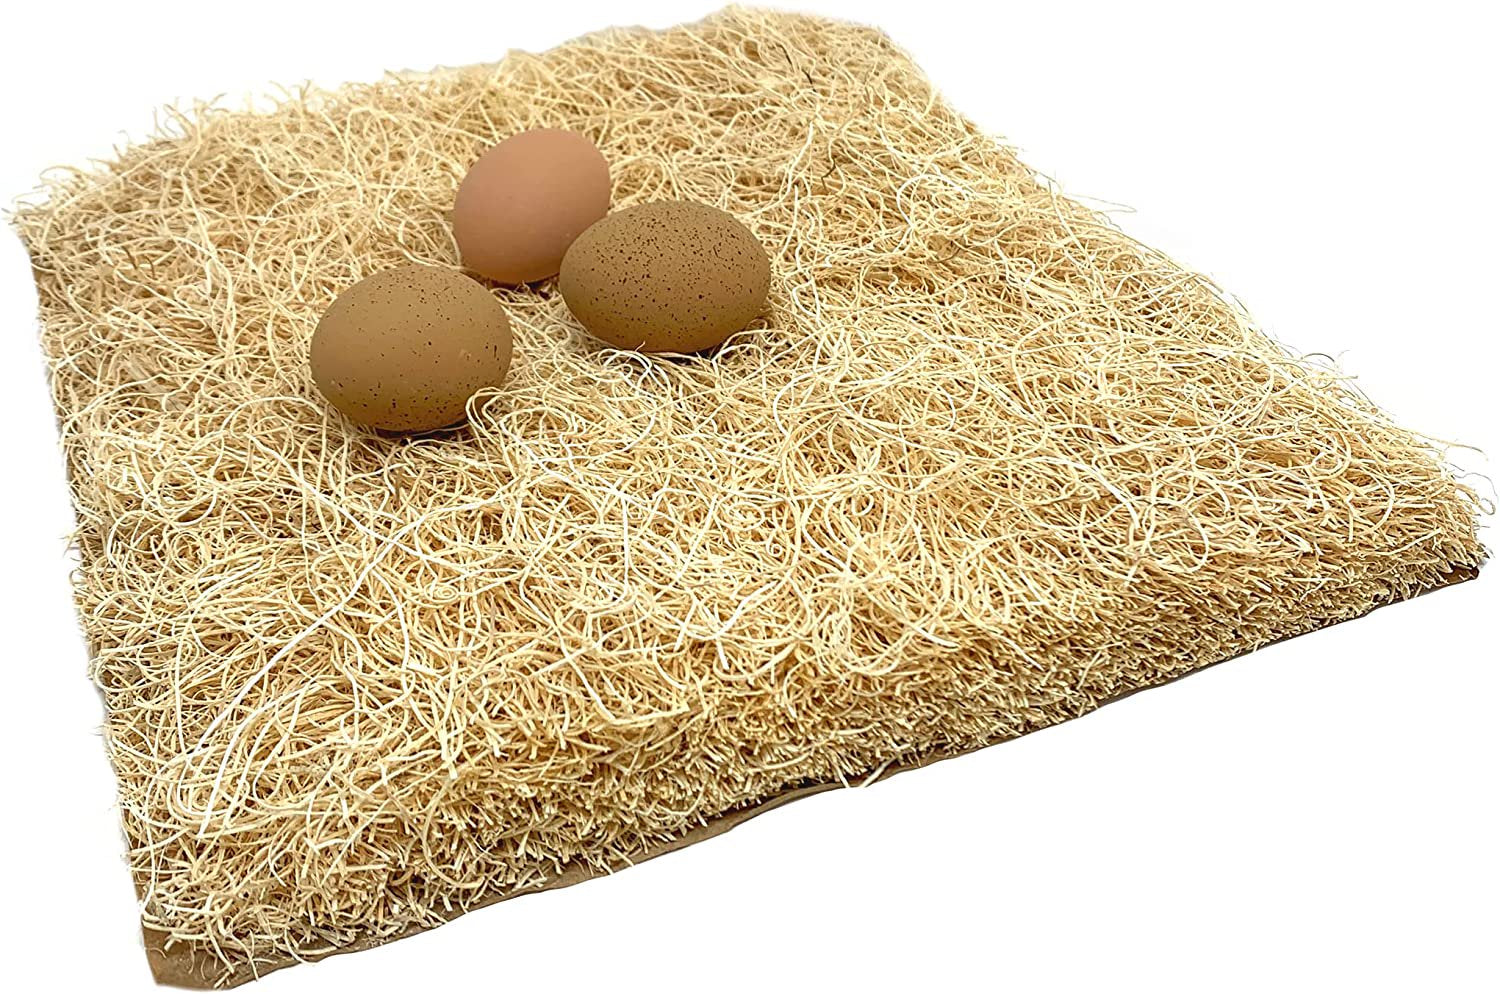 Pecking Order Nest Box Pads 10 Pack, Made with Great Lakes Aspen Excelsior Wood Fibers